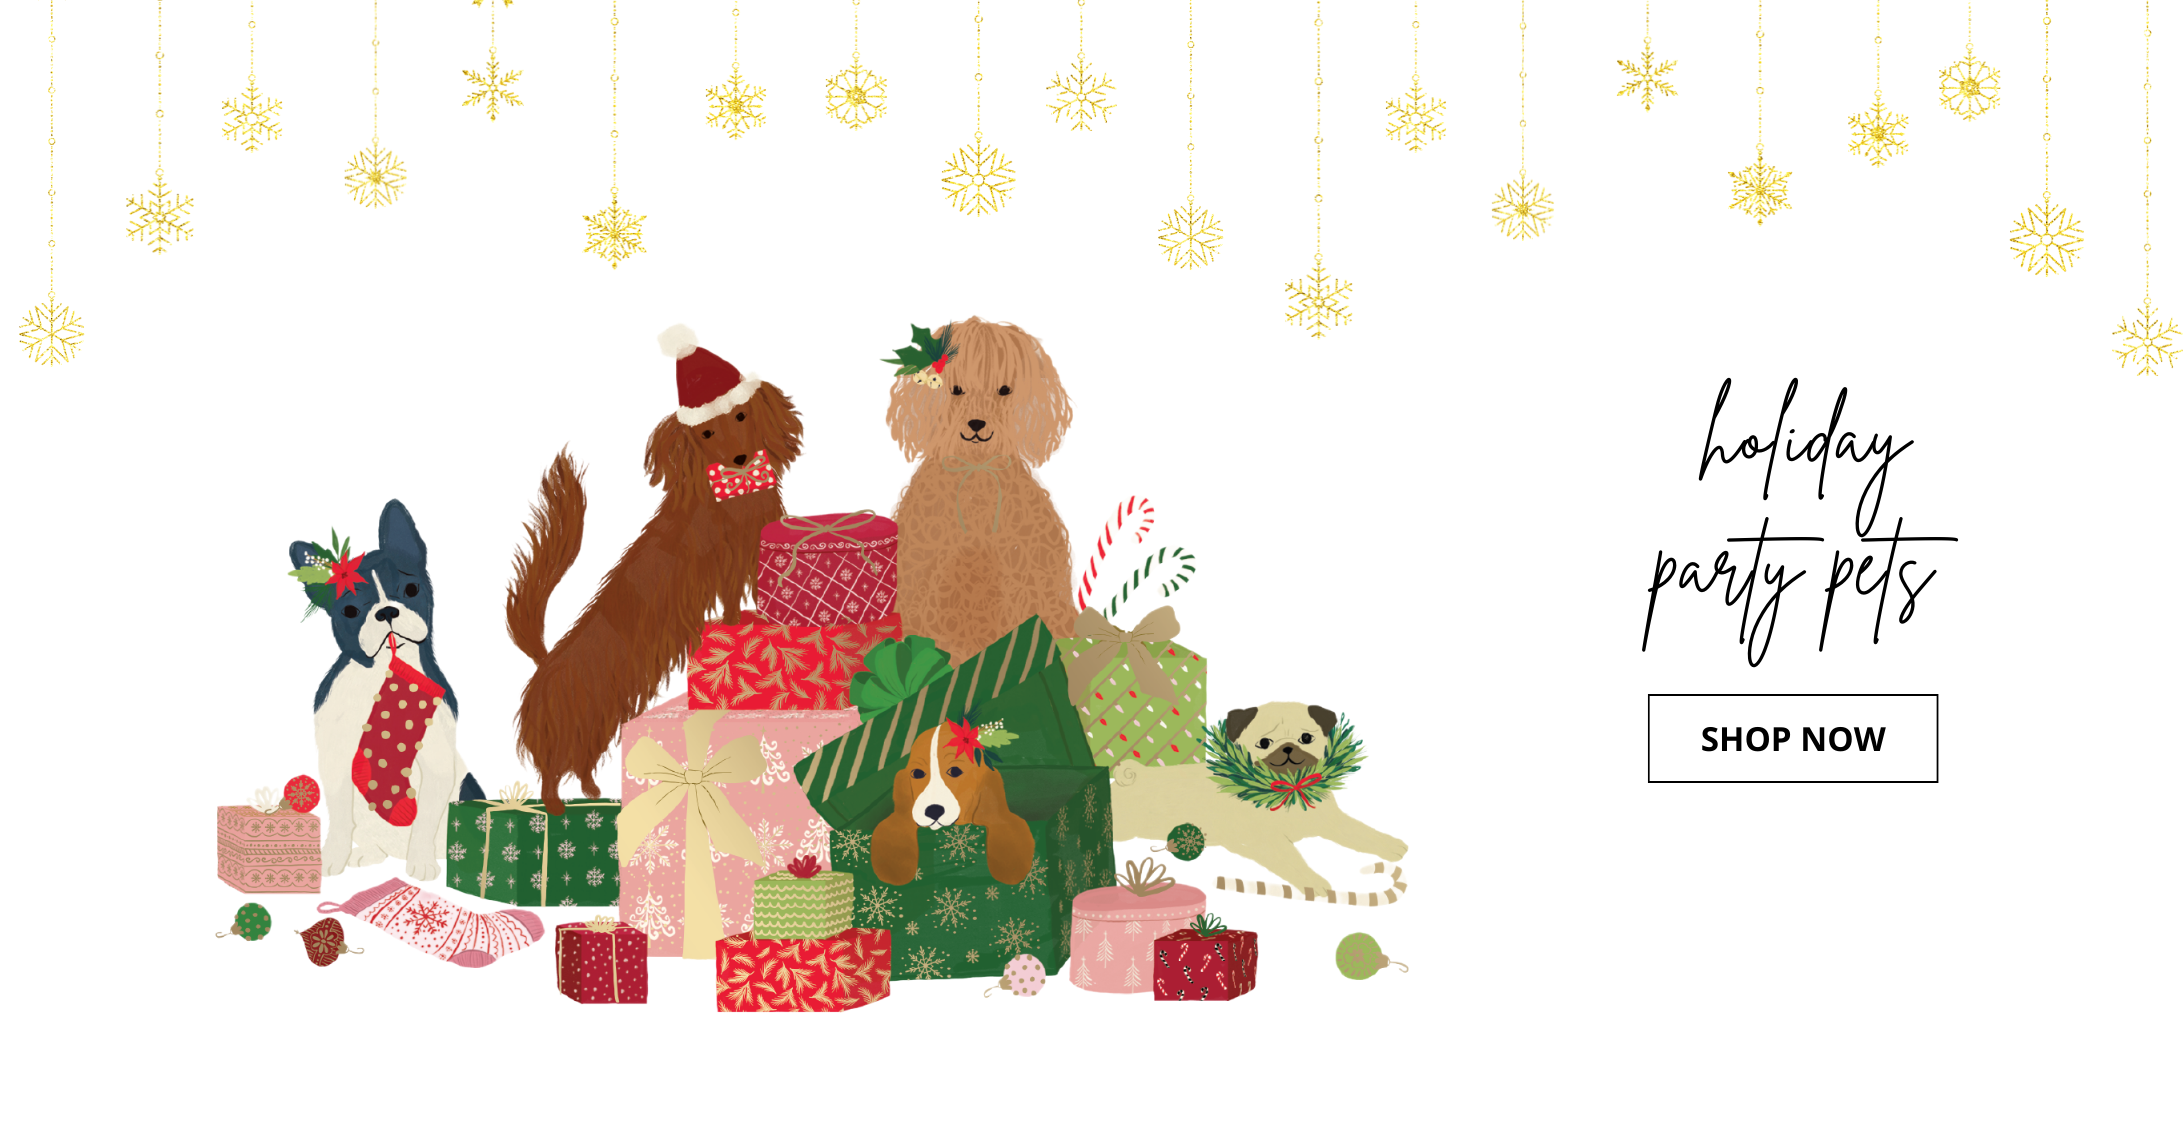 Mollly & Rex Christmas holiday gift and stationery holiday party pets collection